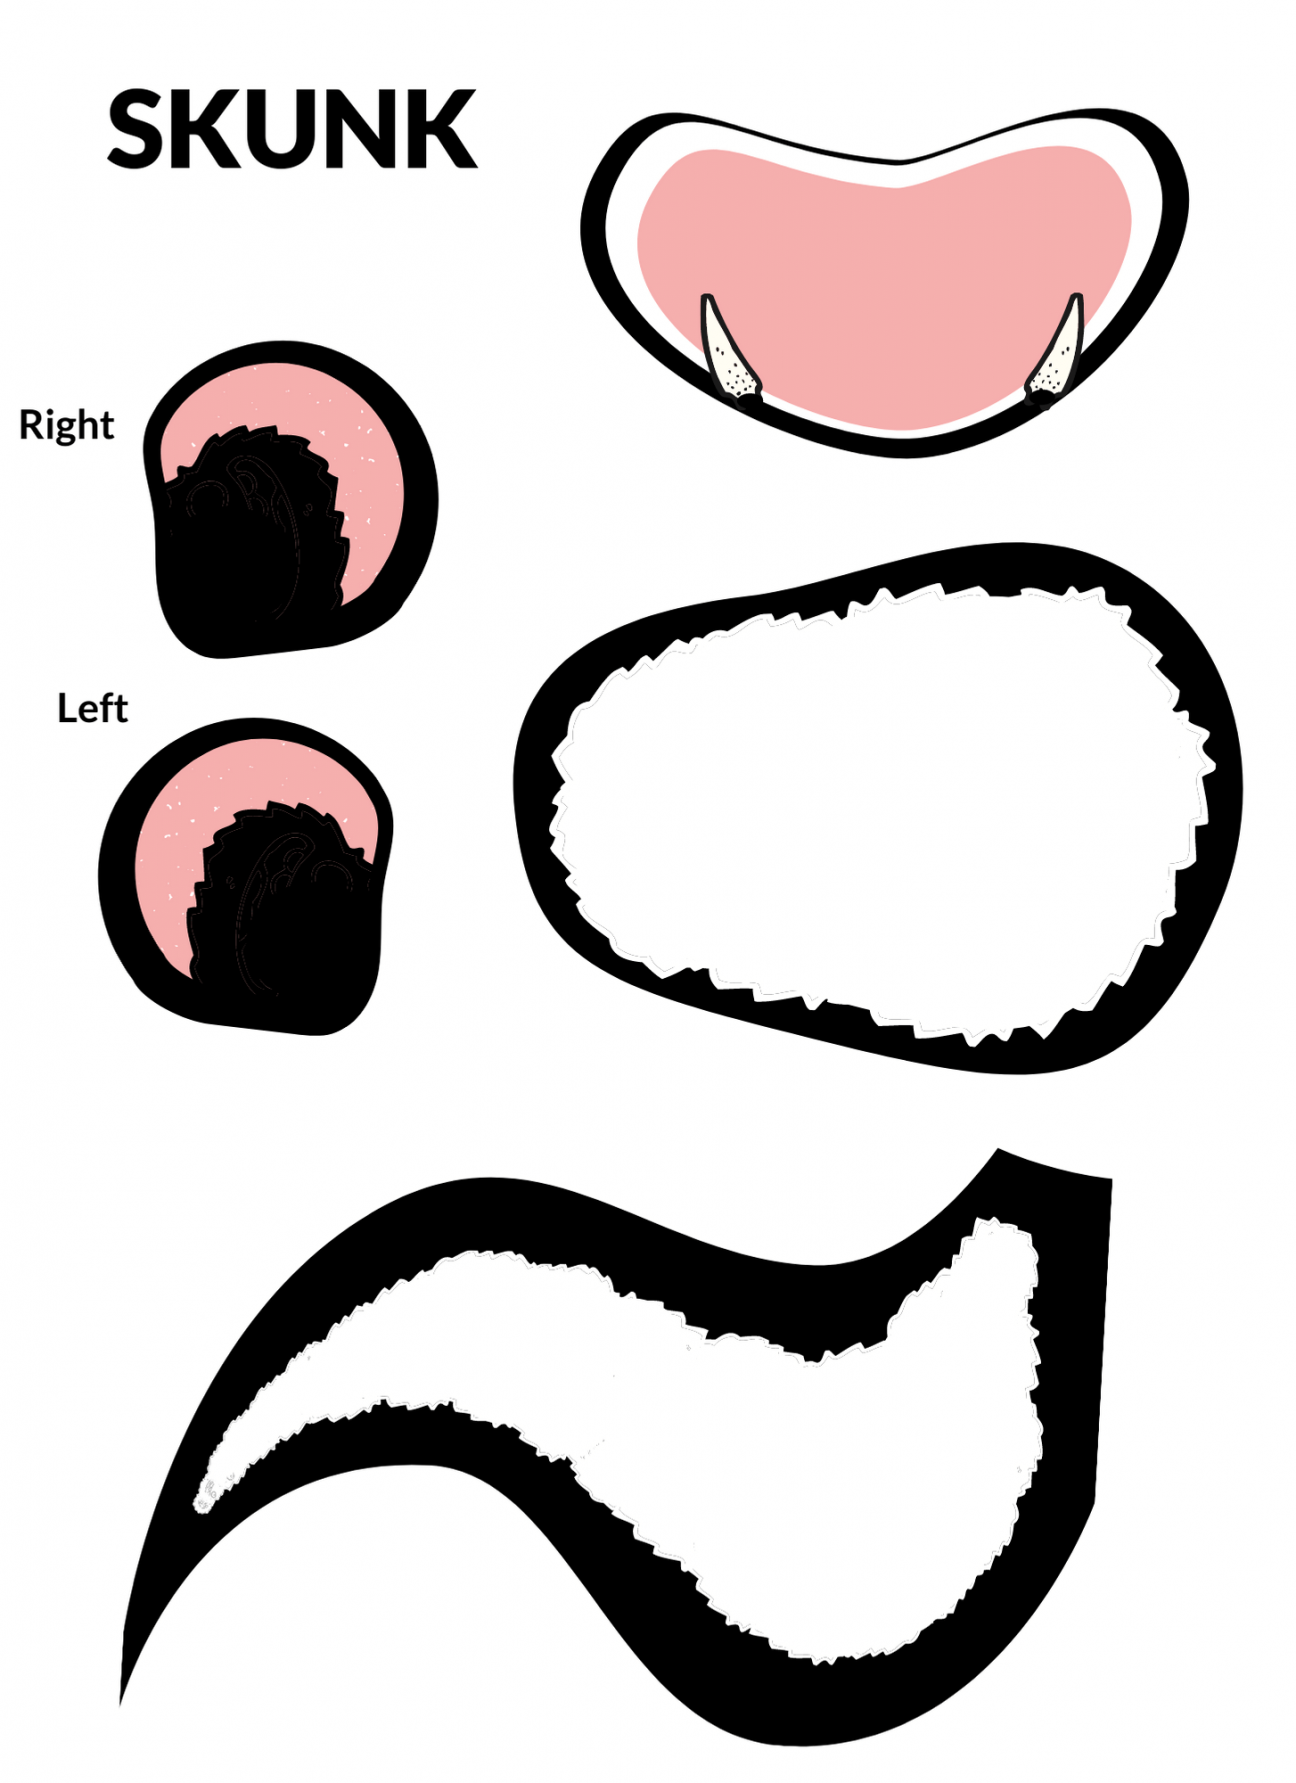 Skunk puppet template, page 2: a mouth, tummy, tail and two ears